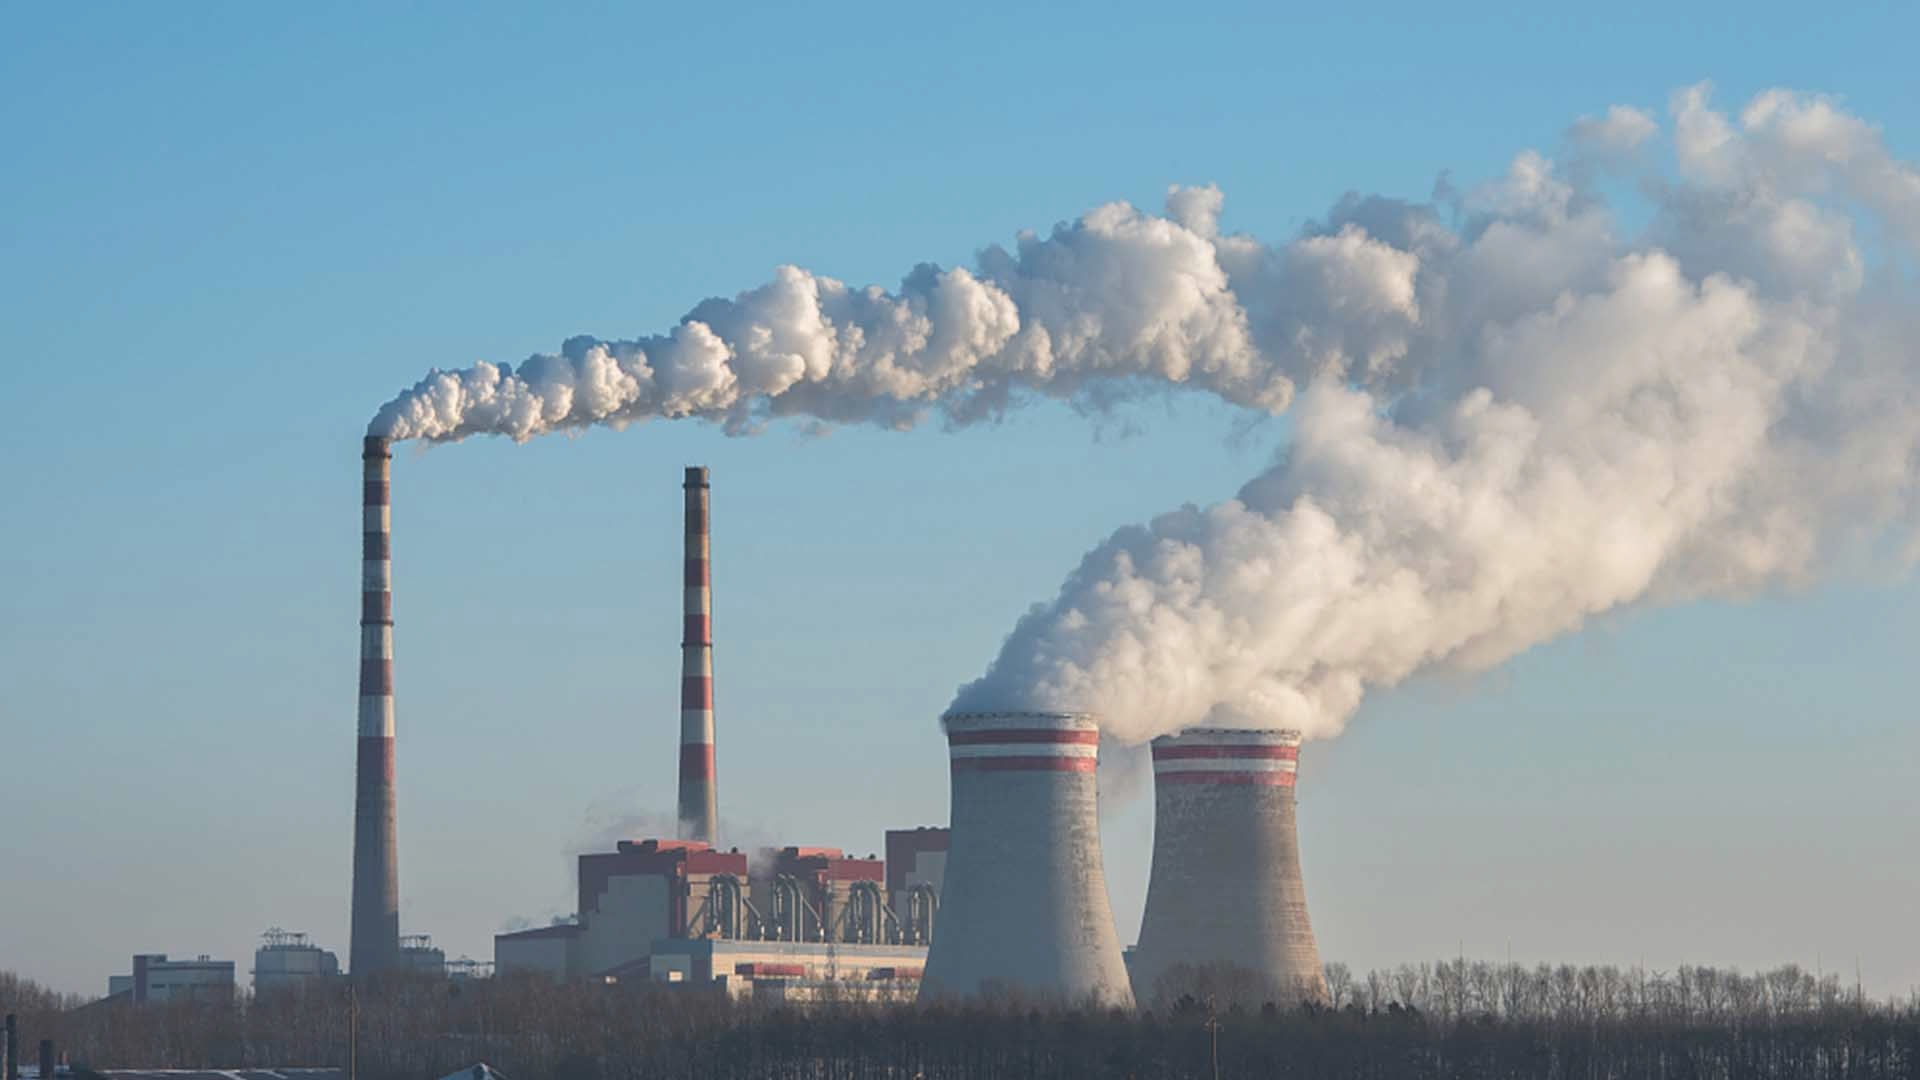 Emissions Trading Market Poised For High Growth